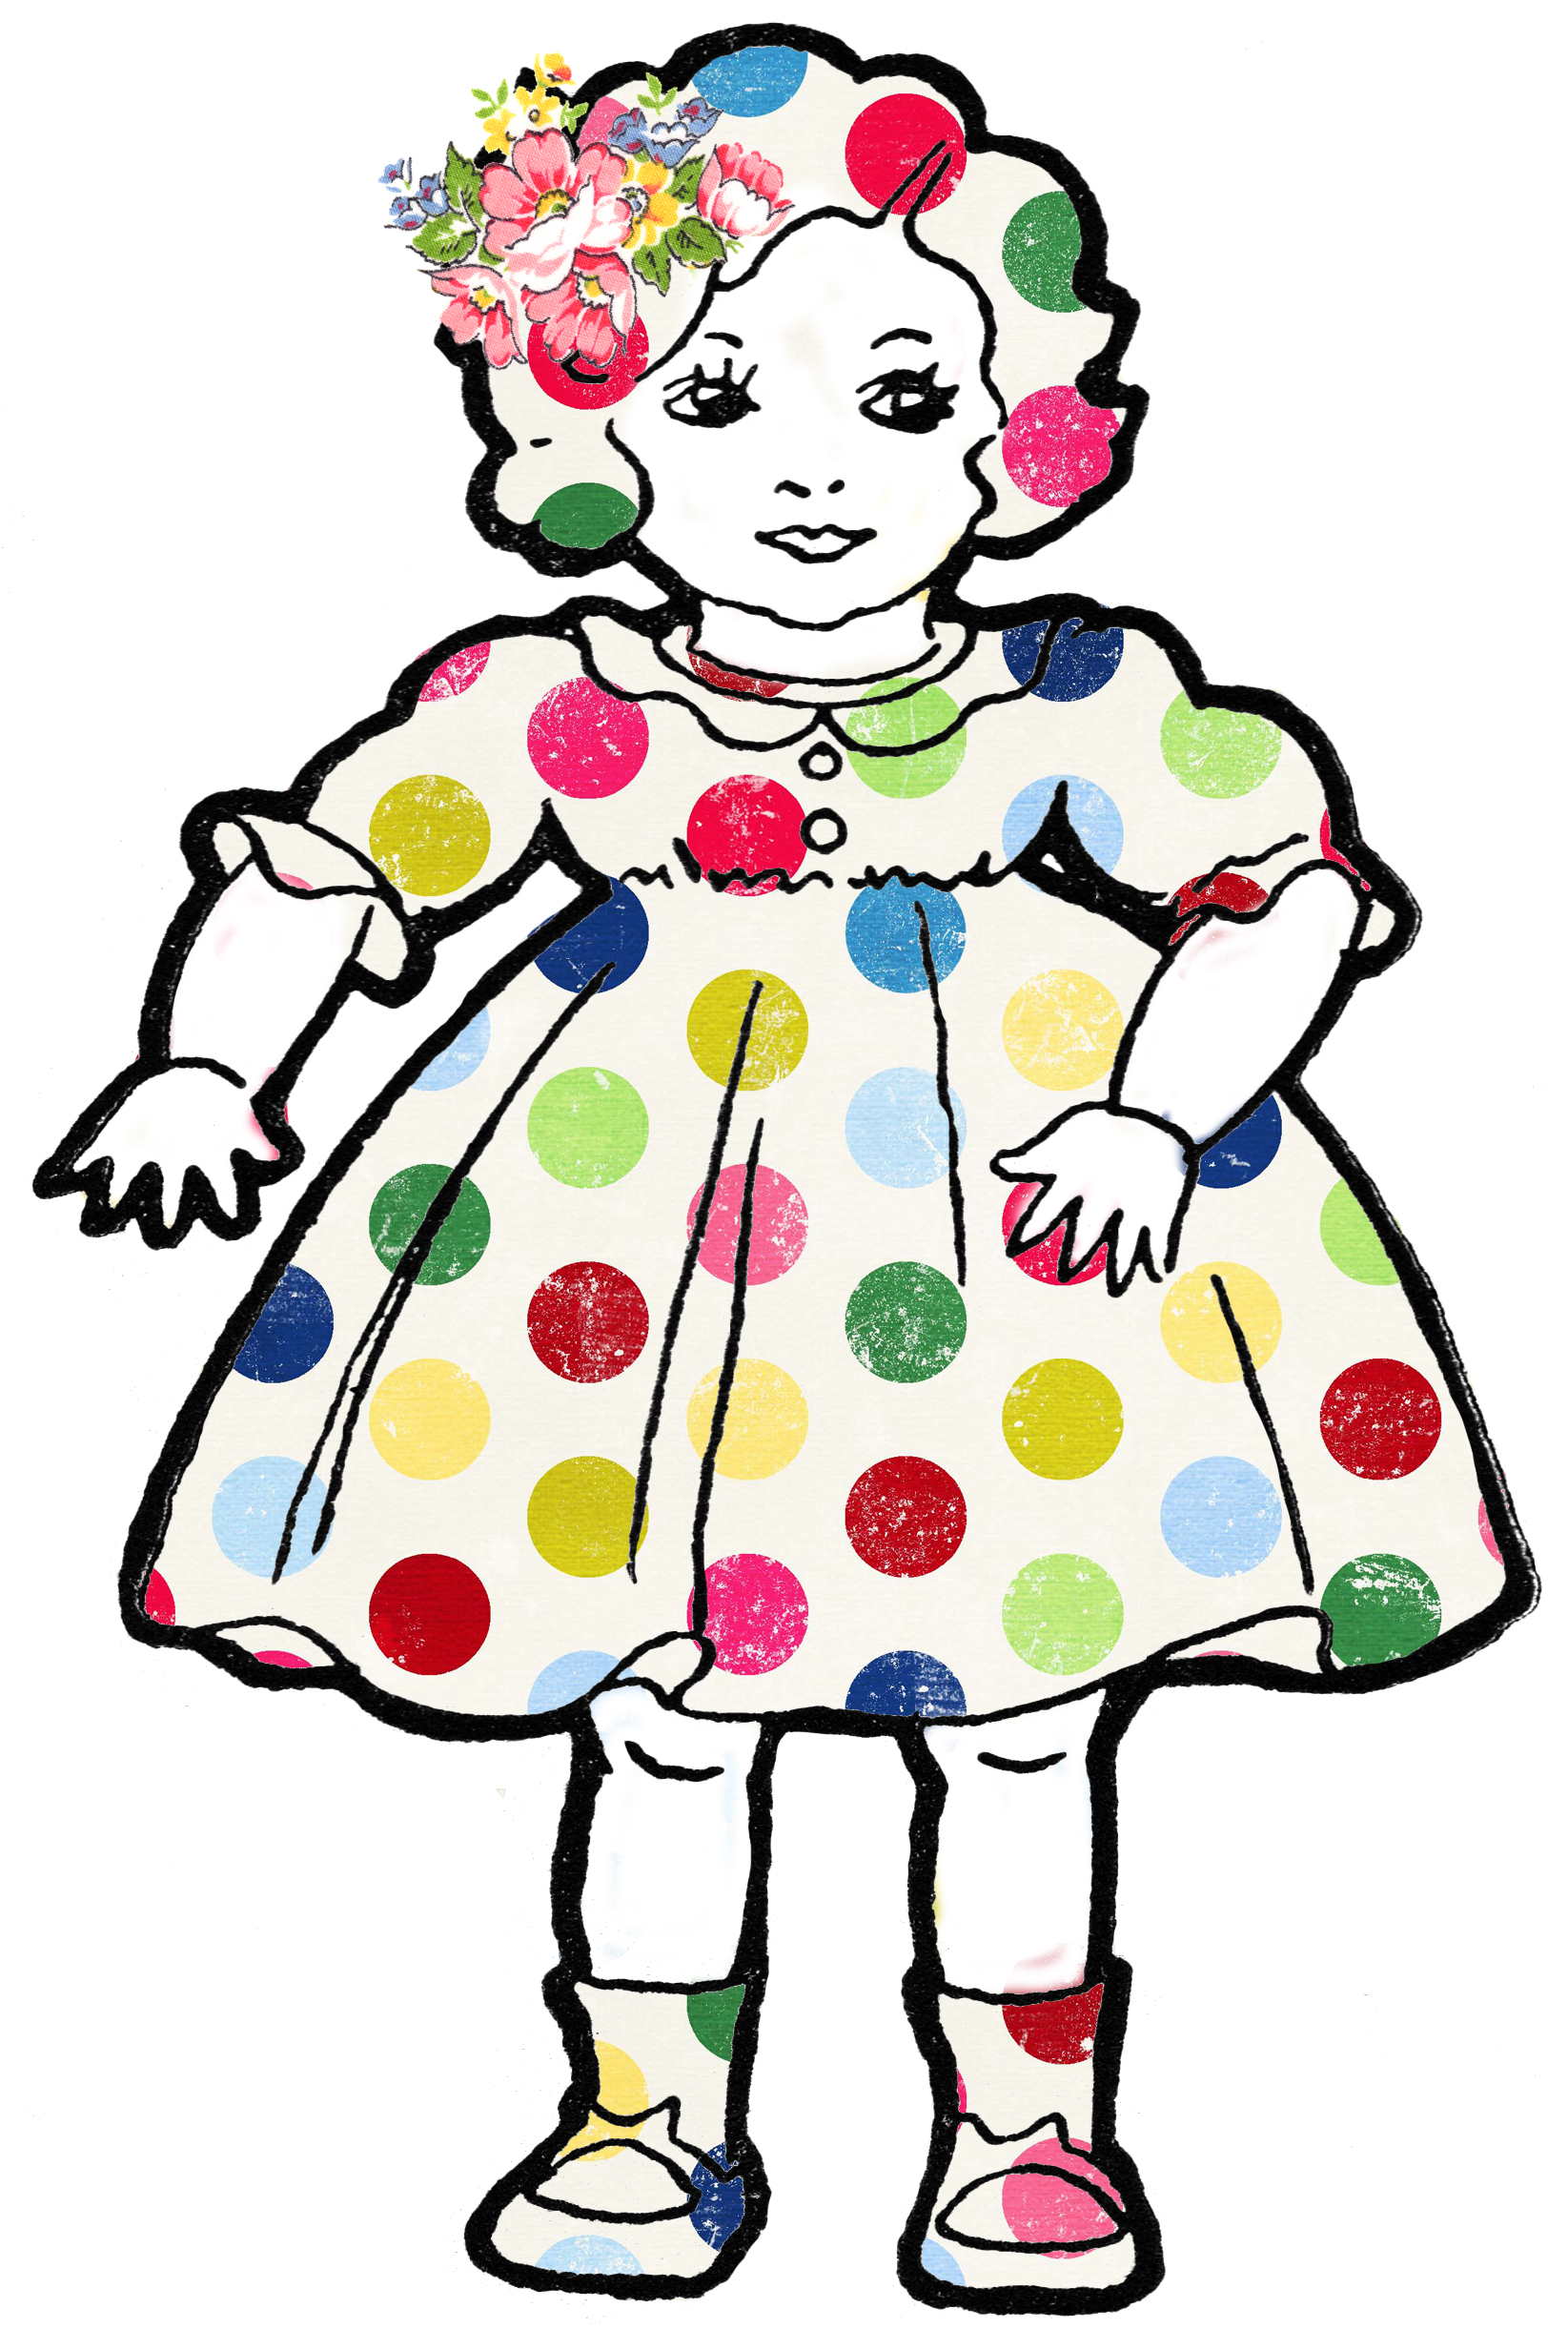 clipart of a doll - photo #25